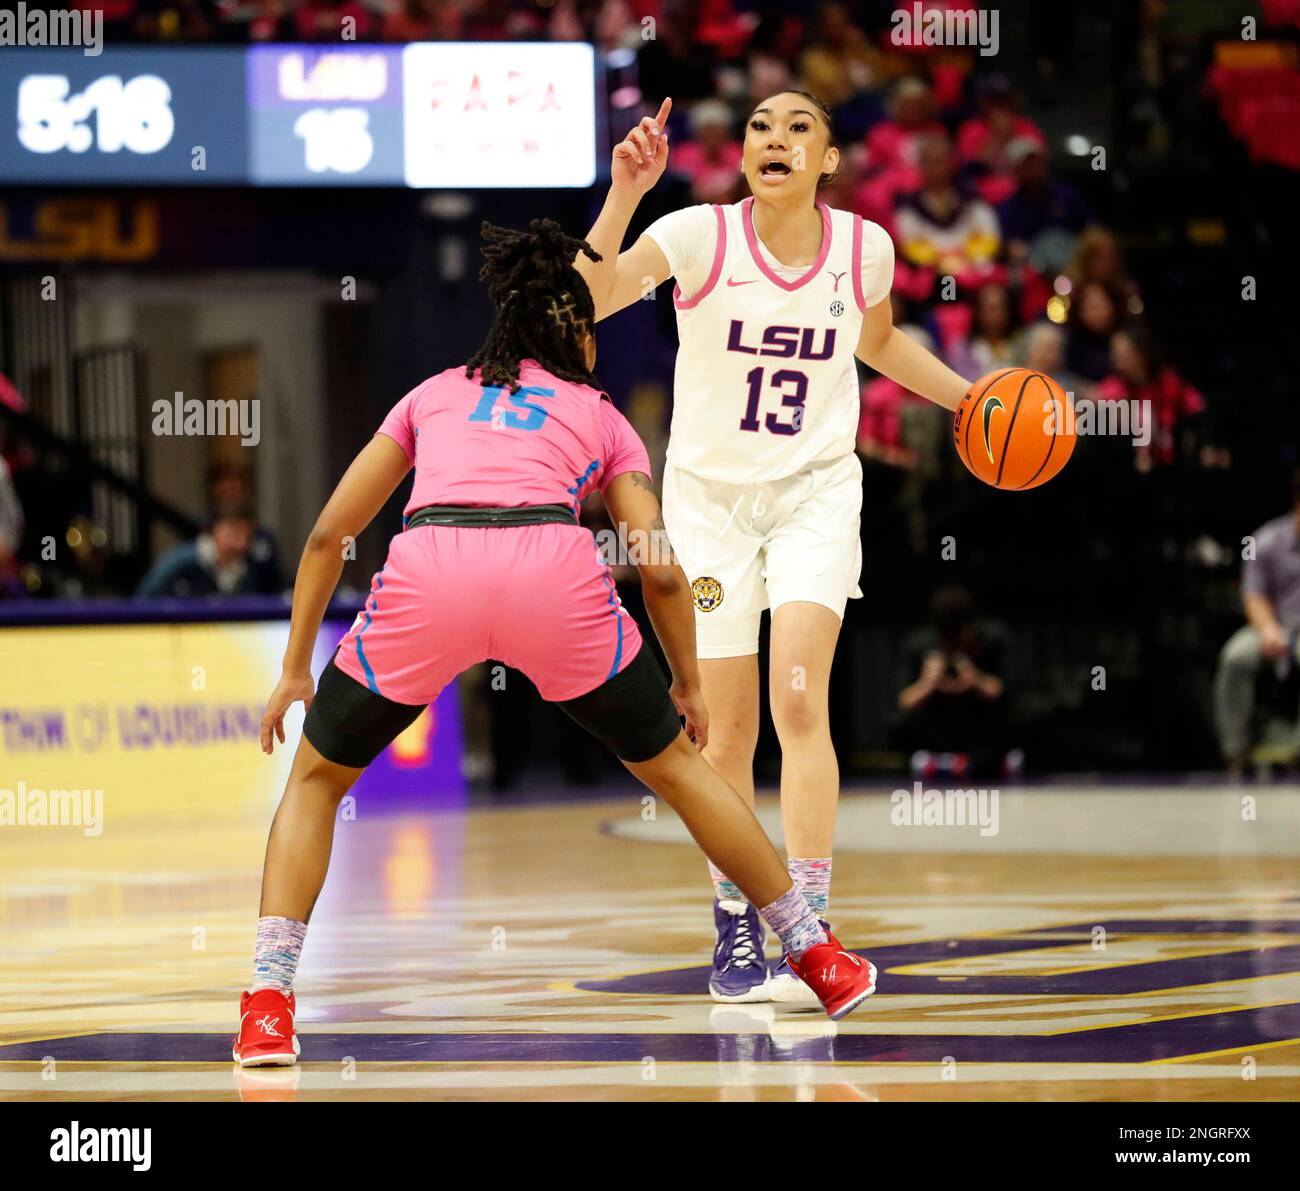 Baton Rouge, USA. 16th Feb, 2023. LSU Lady Tigers guard Last-Tear Poa (13) brings the ball up the court against Ole Miss Rebels guard Angel Baker (15) during a women's college basketball game at the Pete Maravich Assembly Center in Baton Rouge, Louisiana on Thursday, February 16, 2022. (Photo by Peter G. Forest/Sipa USA) Credit: Sipa USA/Alamy Live News Stock Photo